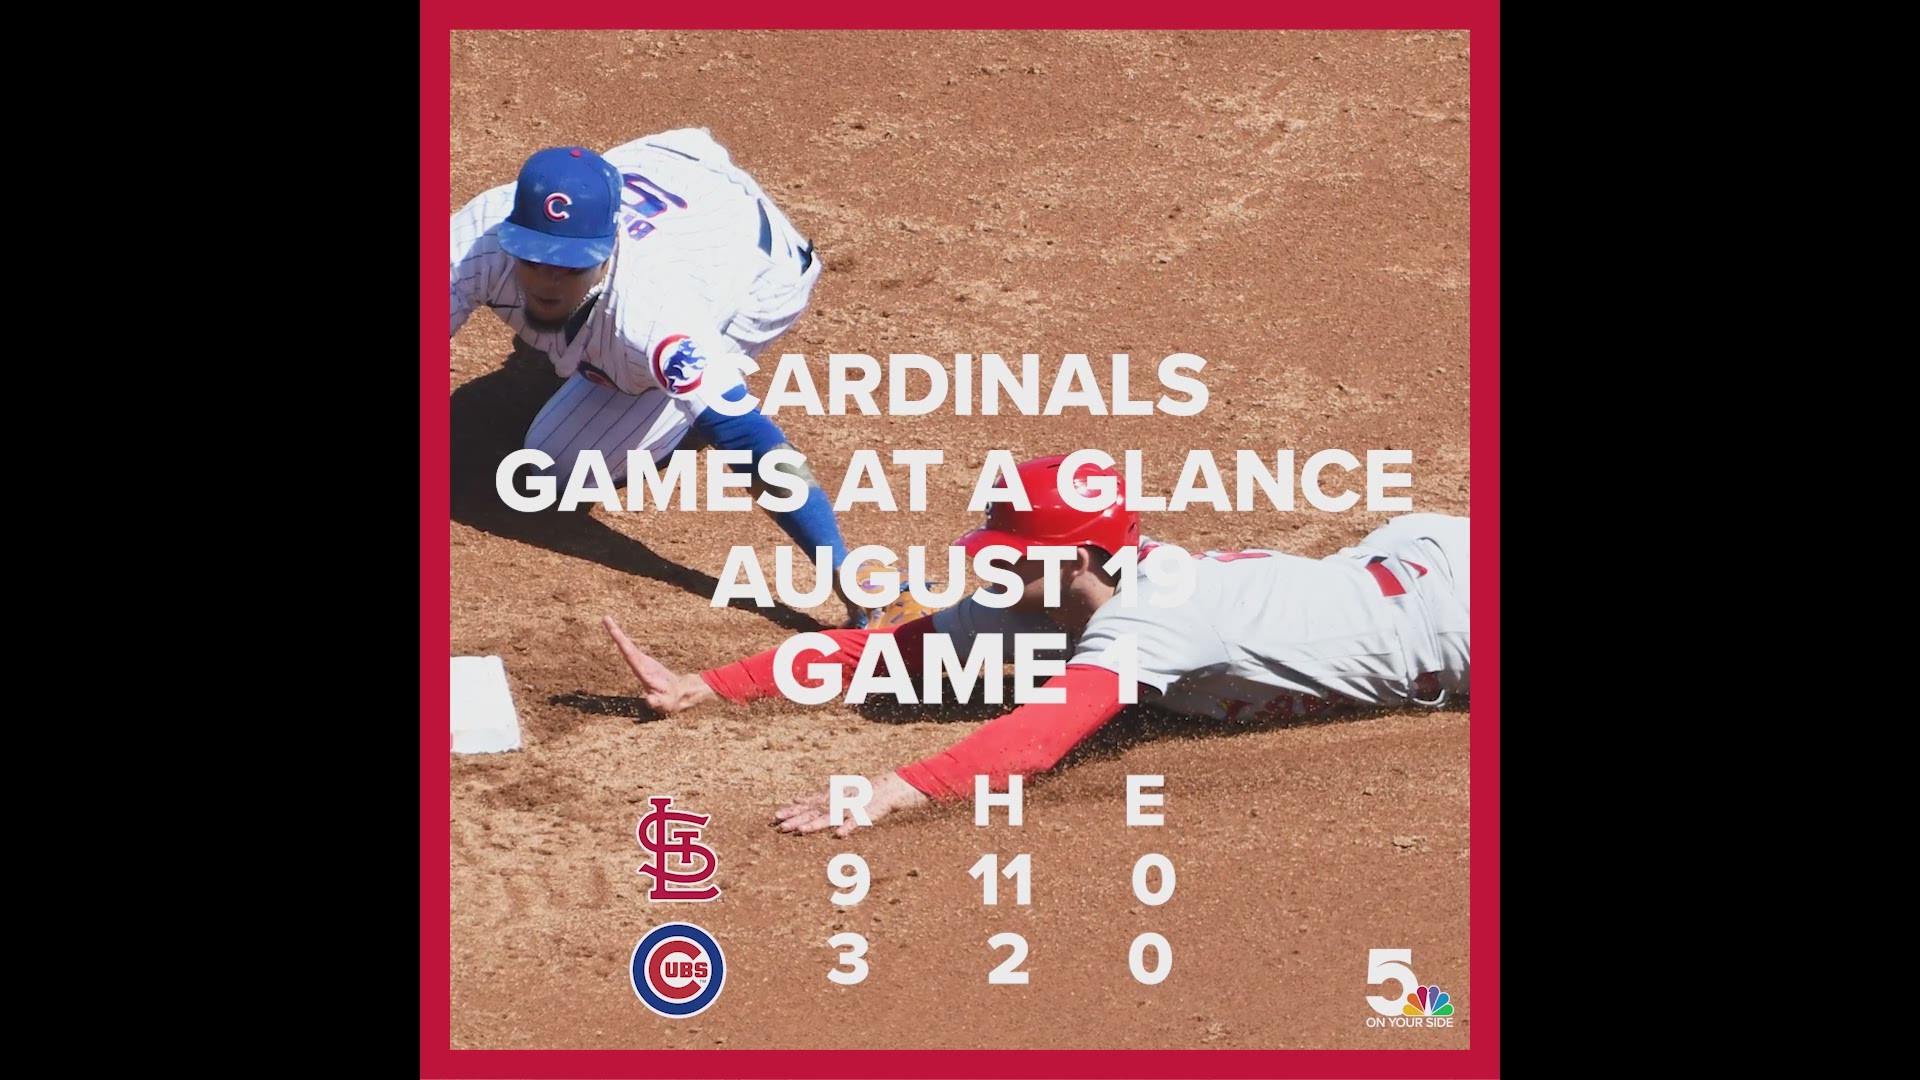 In their first road trip back from a COVID-19 outbreak the Cardinals managed to go 4-4.